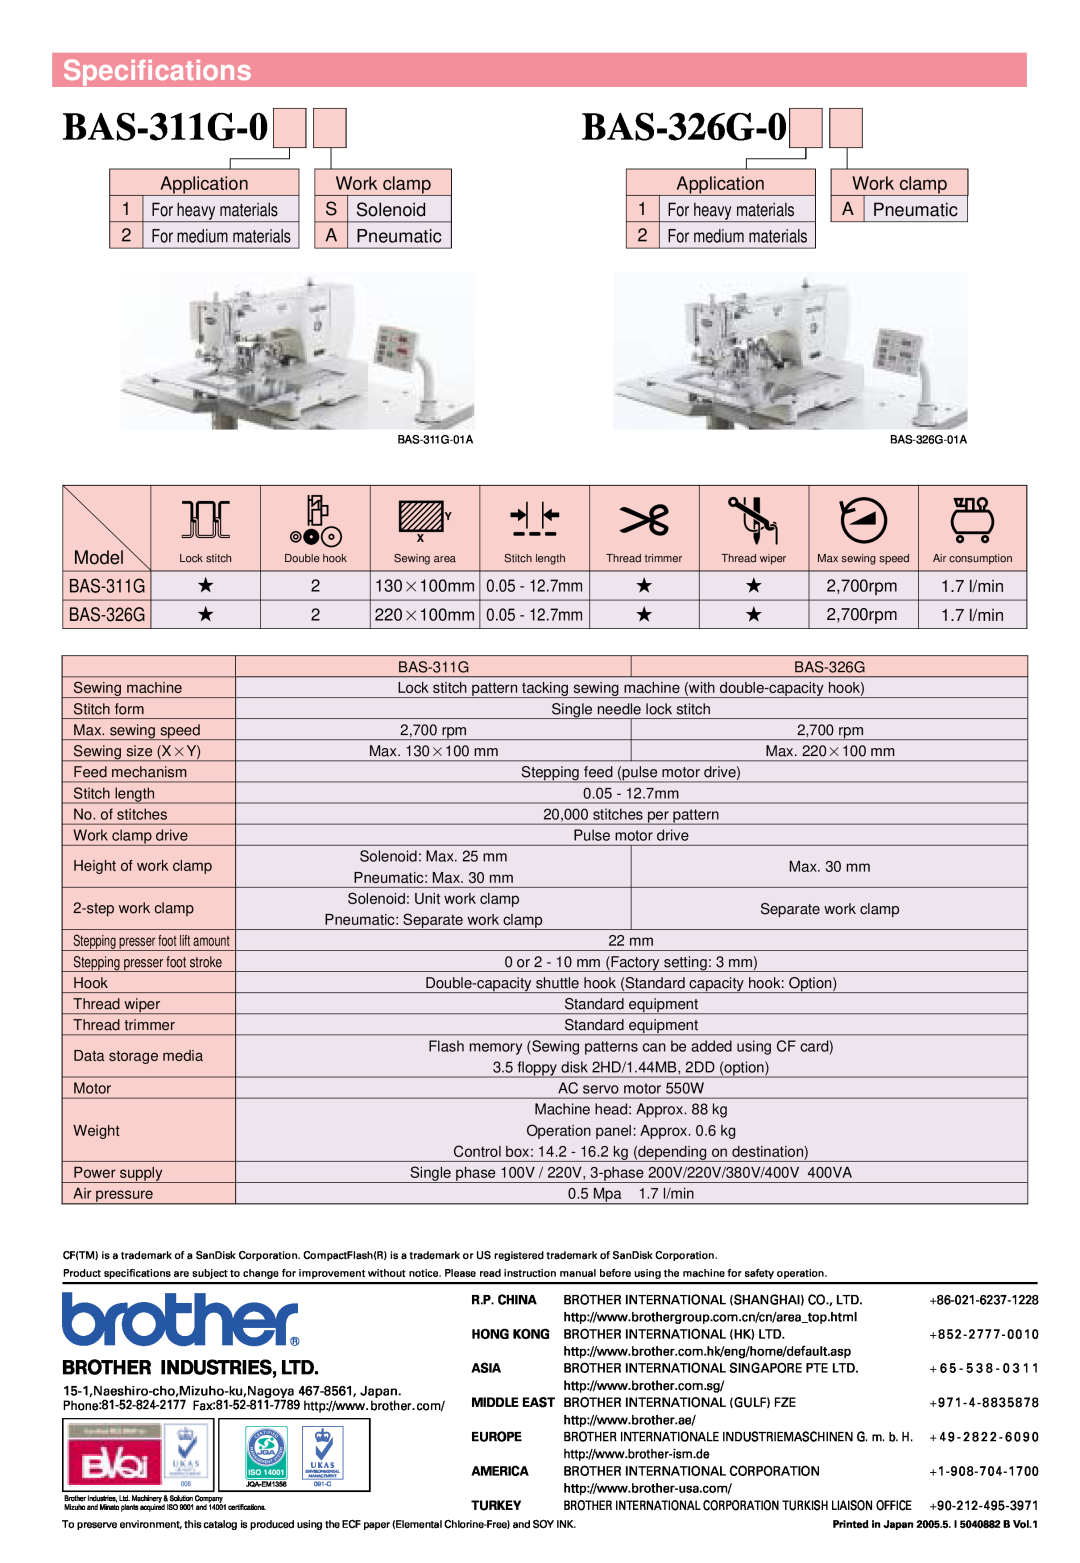 Brother manual Specifications, BAS-311G-0, BAS-326G-0 